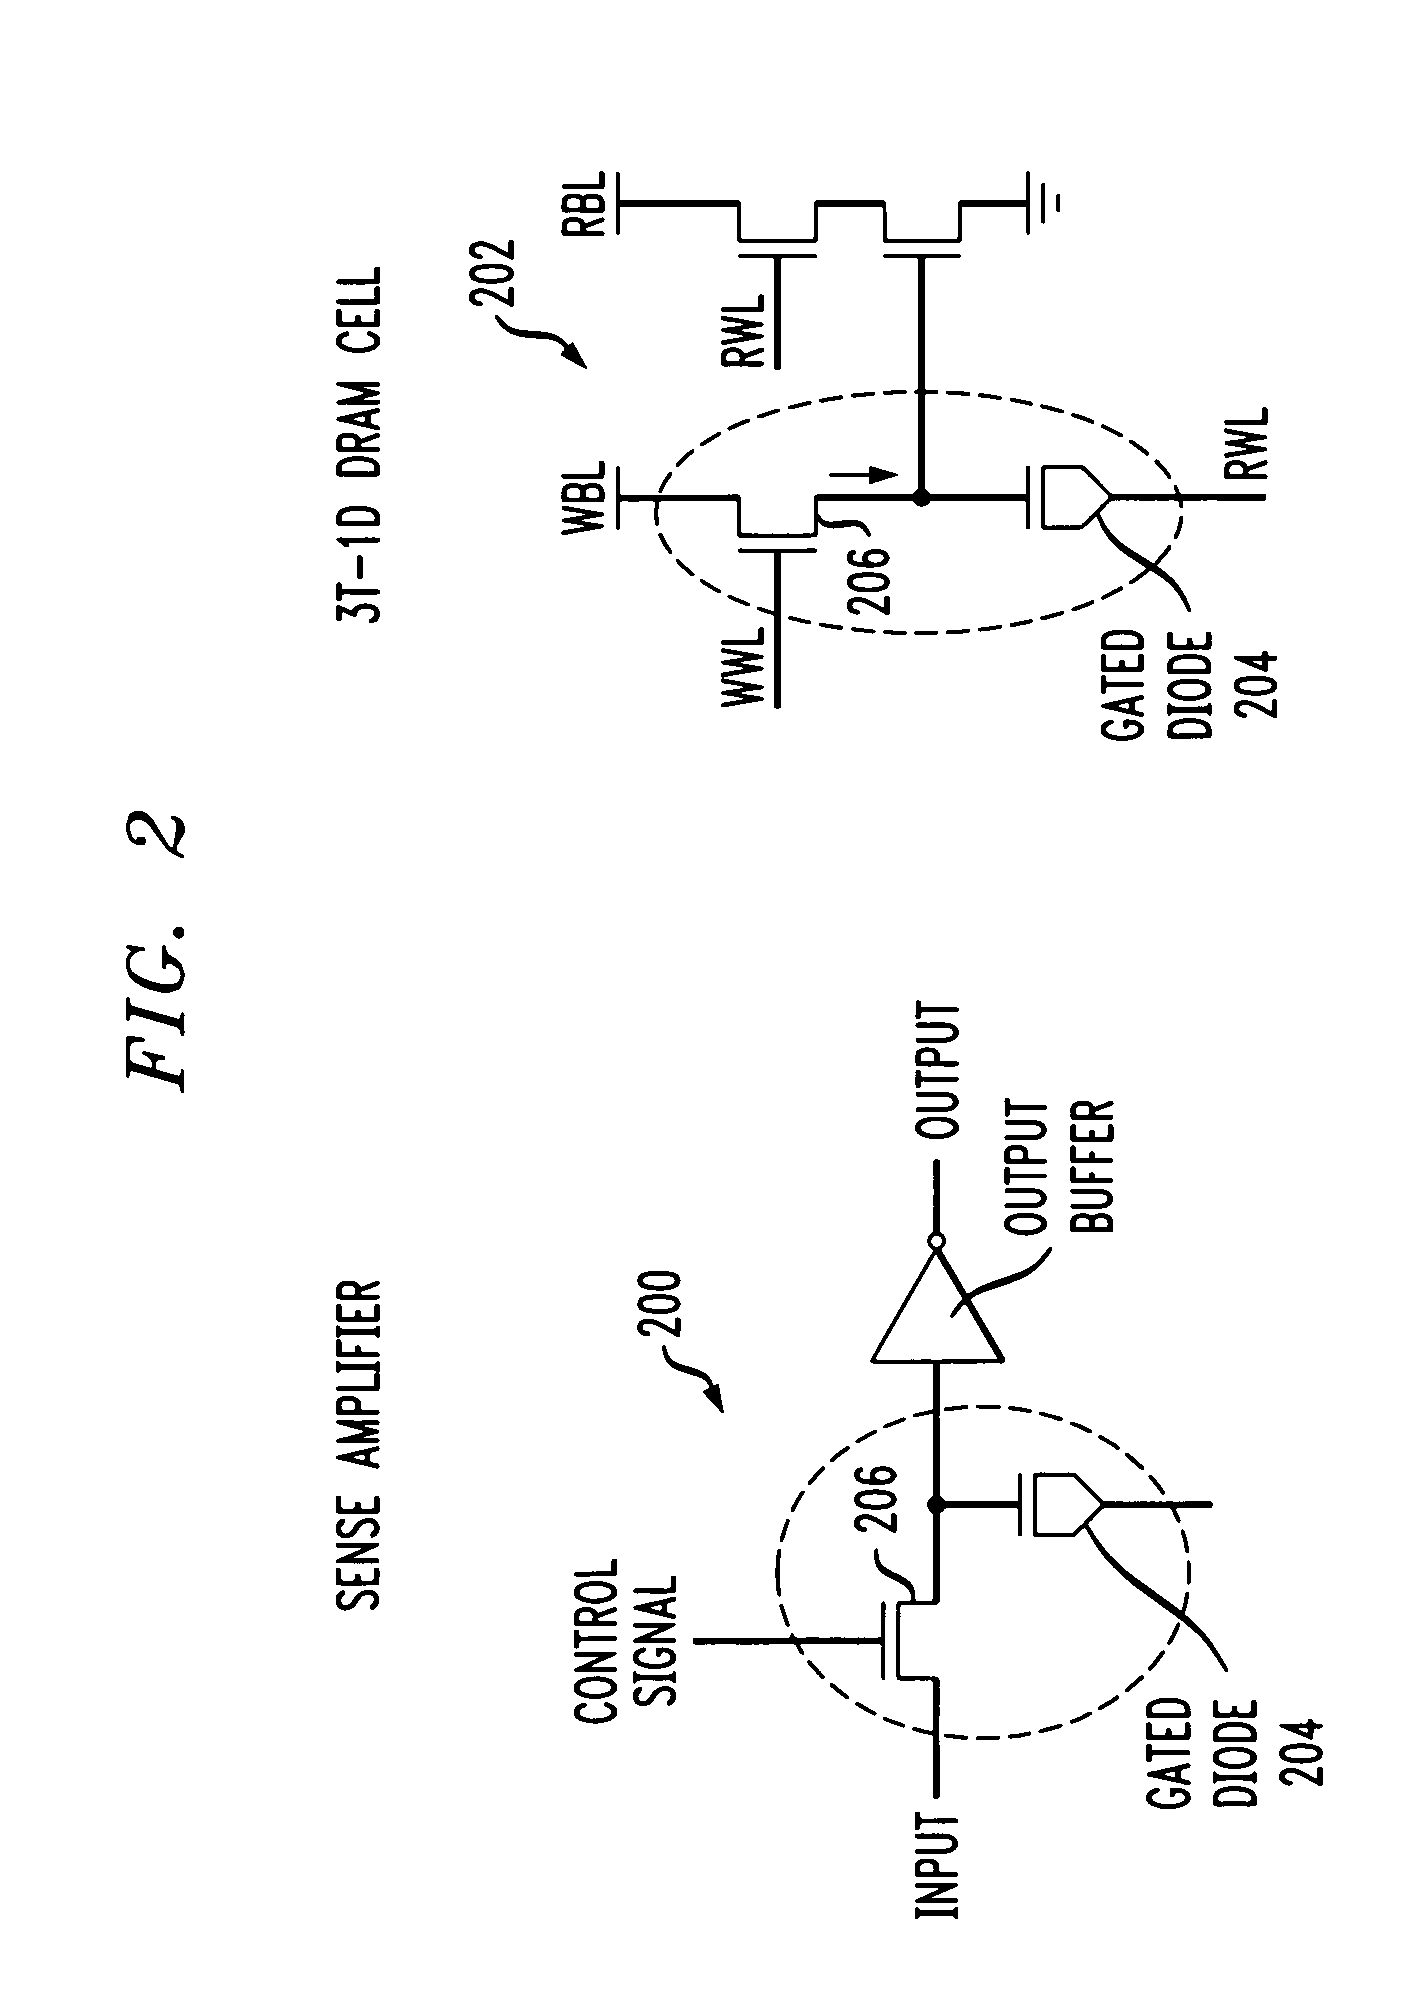 Area-efficient gated diode structure and method of forming same